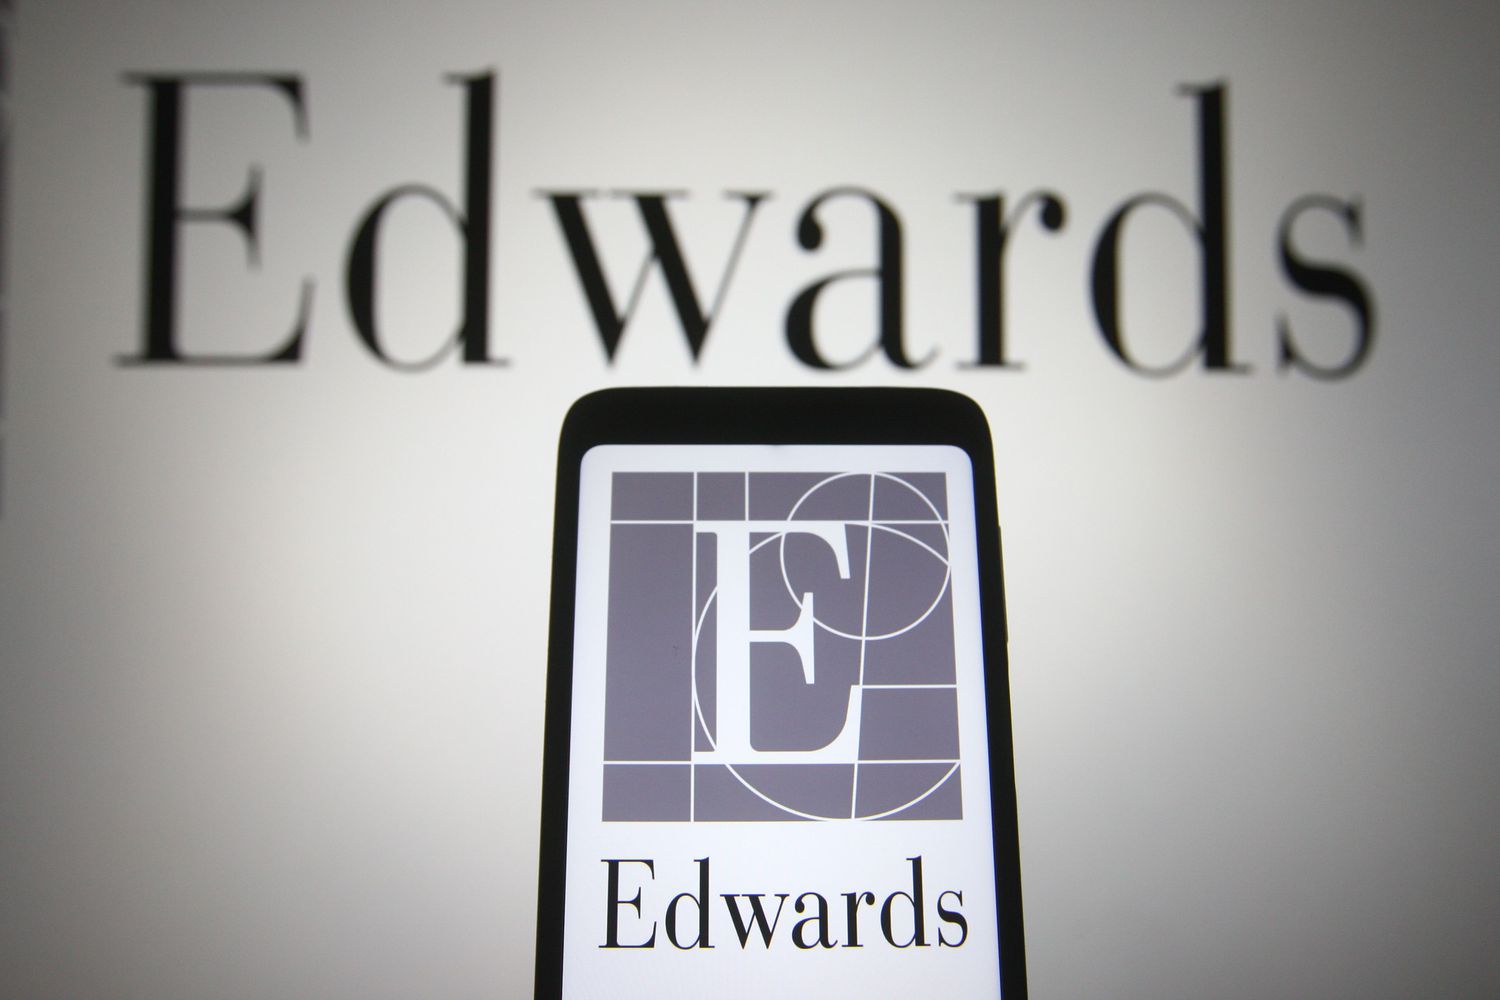 Edwards Lifesciences Stock Plummeted Today. Here